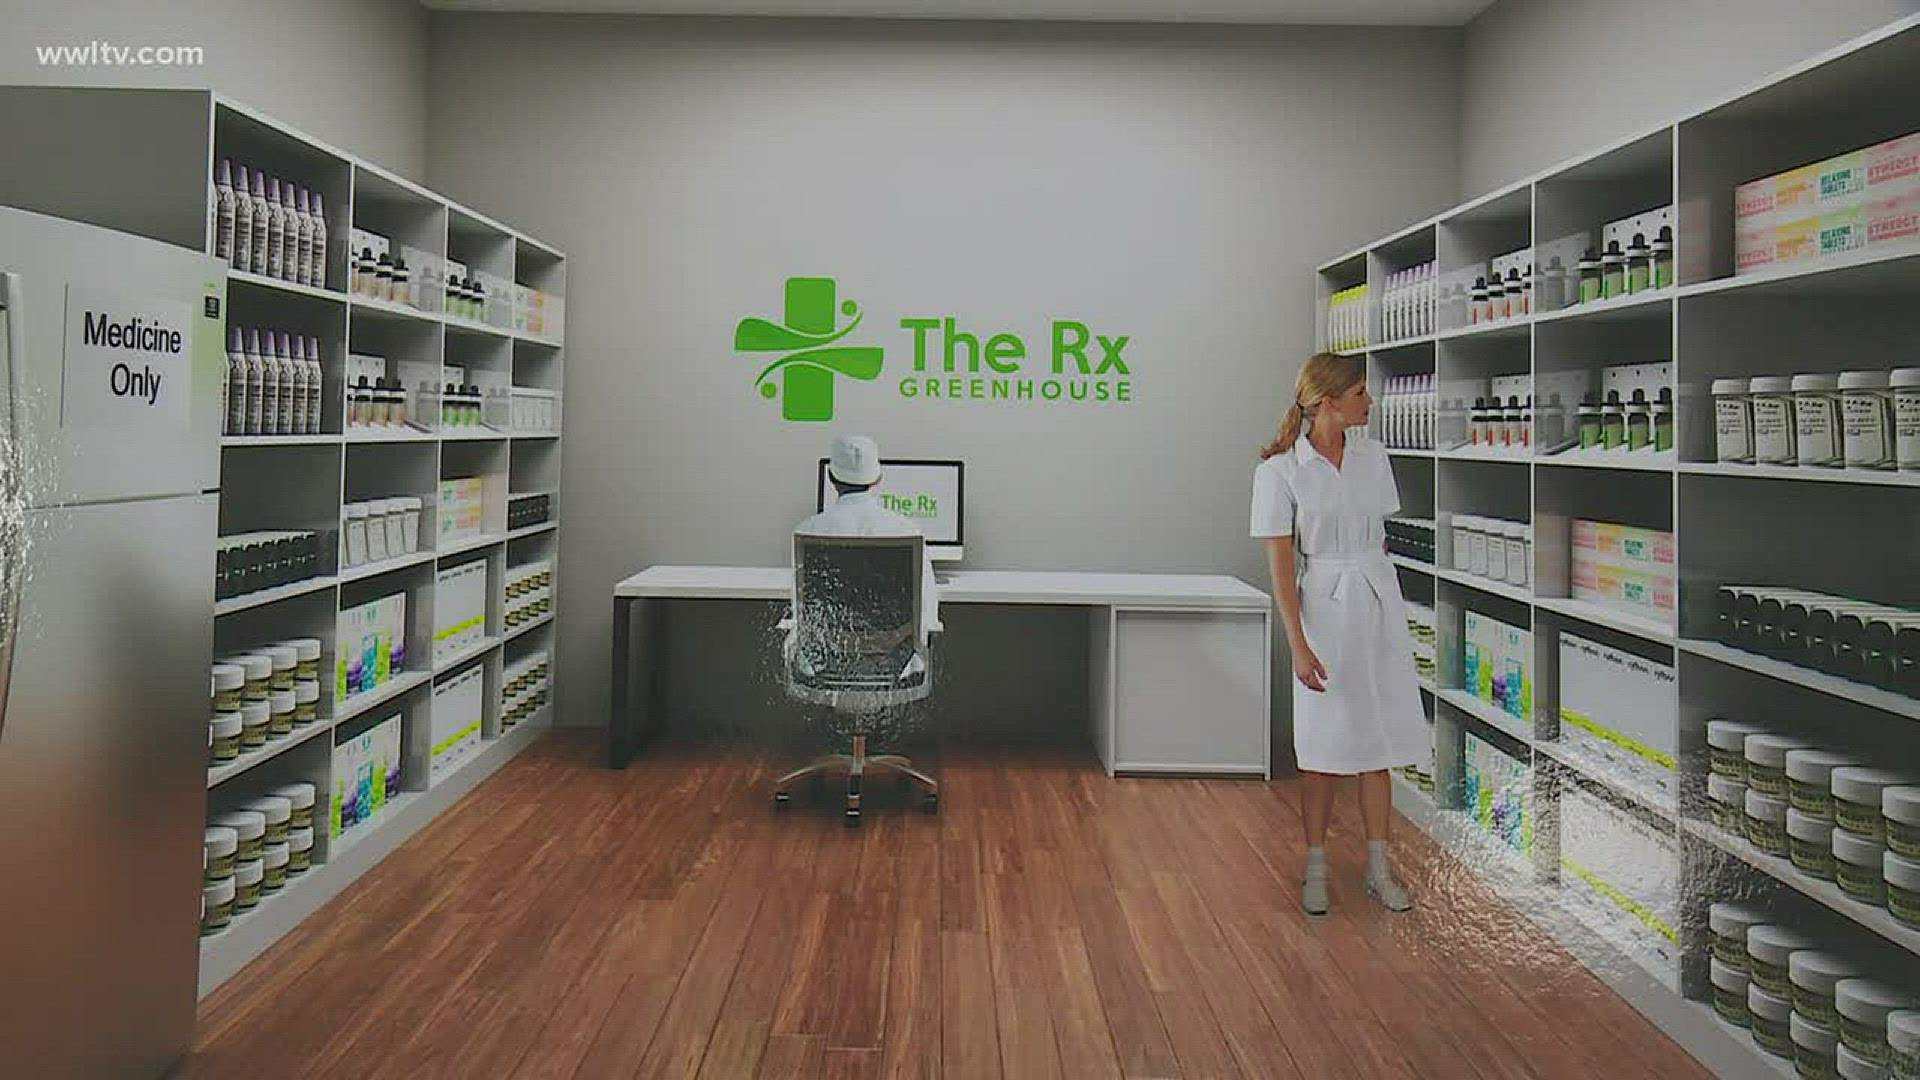 Pharmacists and investors are working to open the first and only medical marijuana pharmacy in the Greater New Orleans Area.